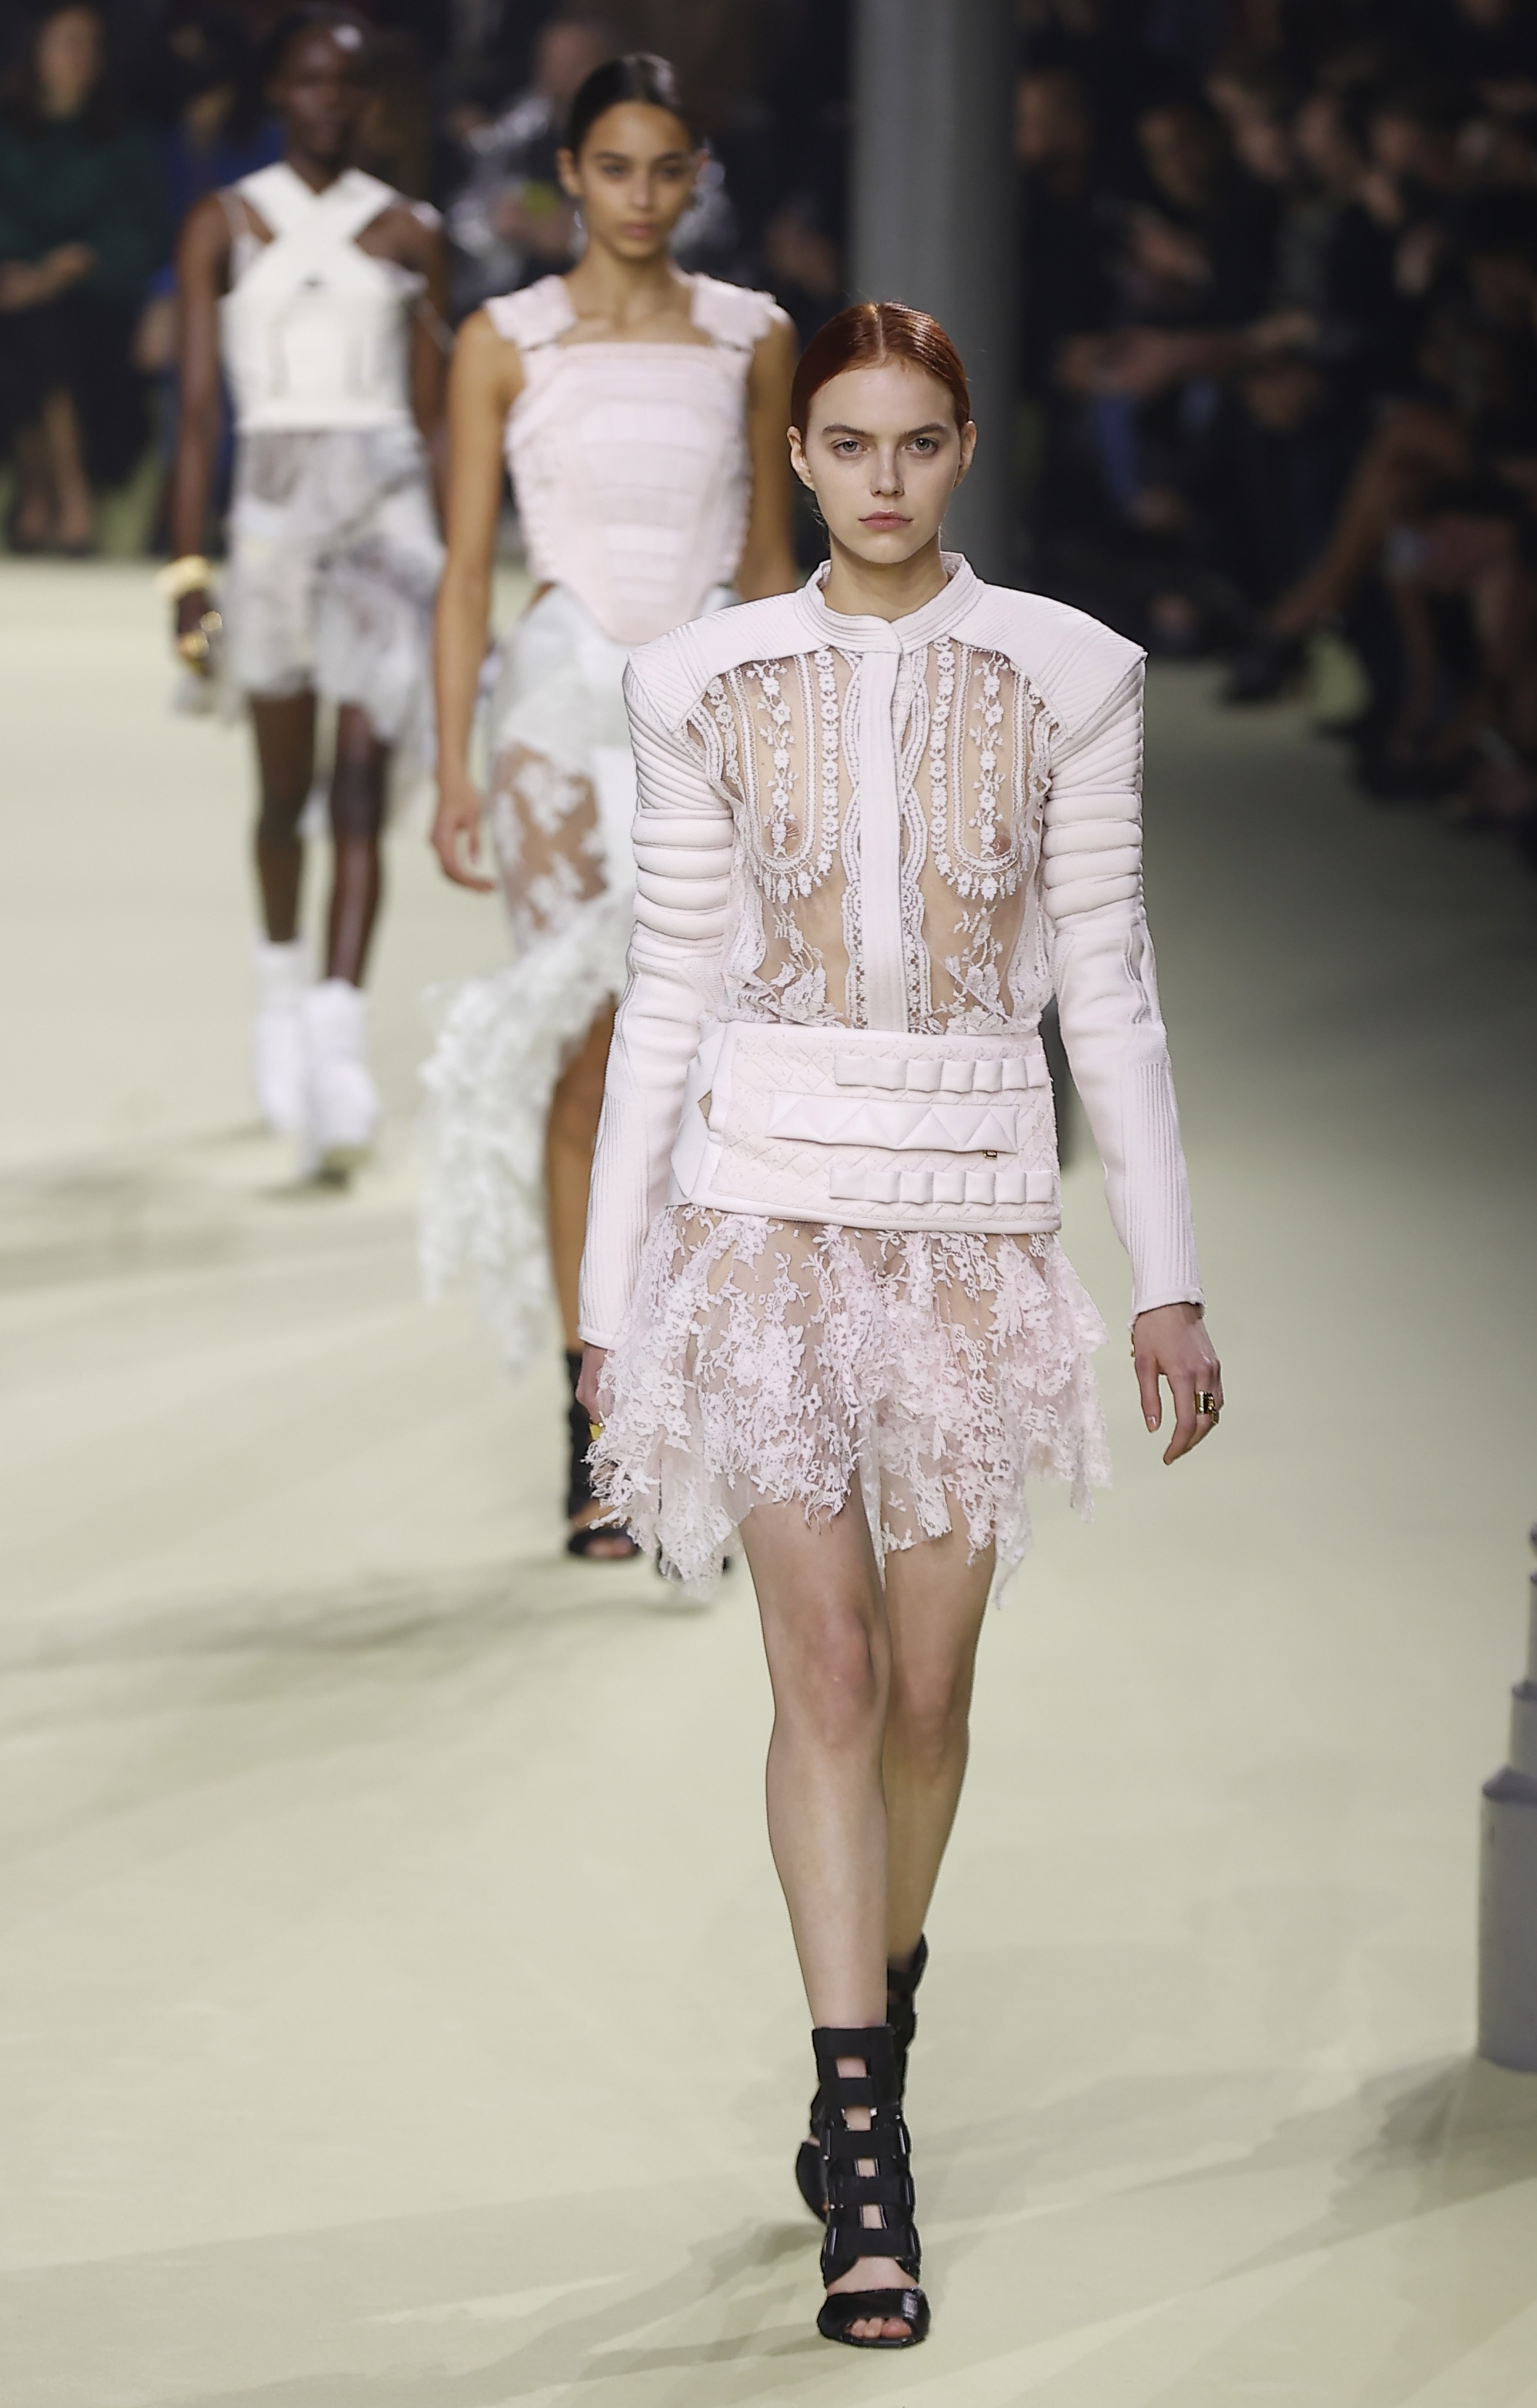 Paris Fashion Week 2022: How Balmain called for peace and truth in ...